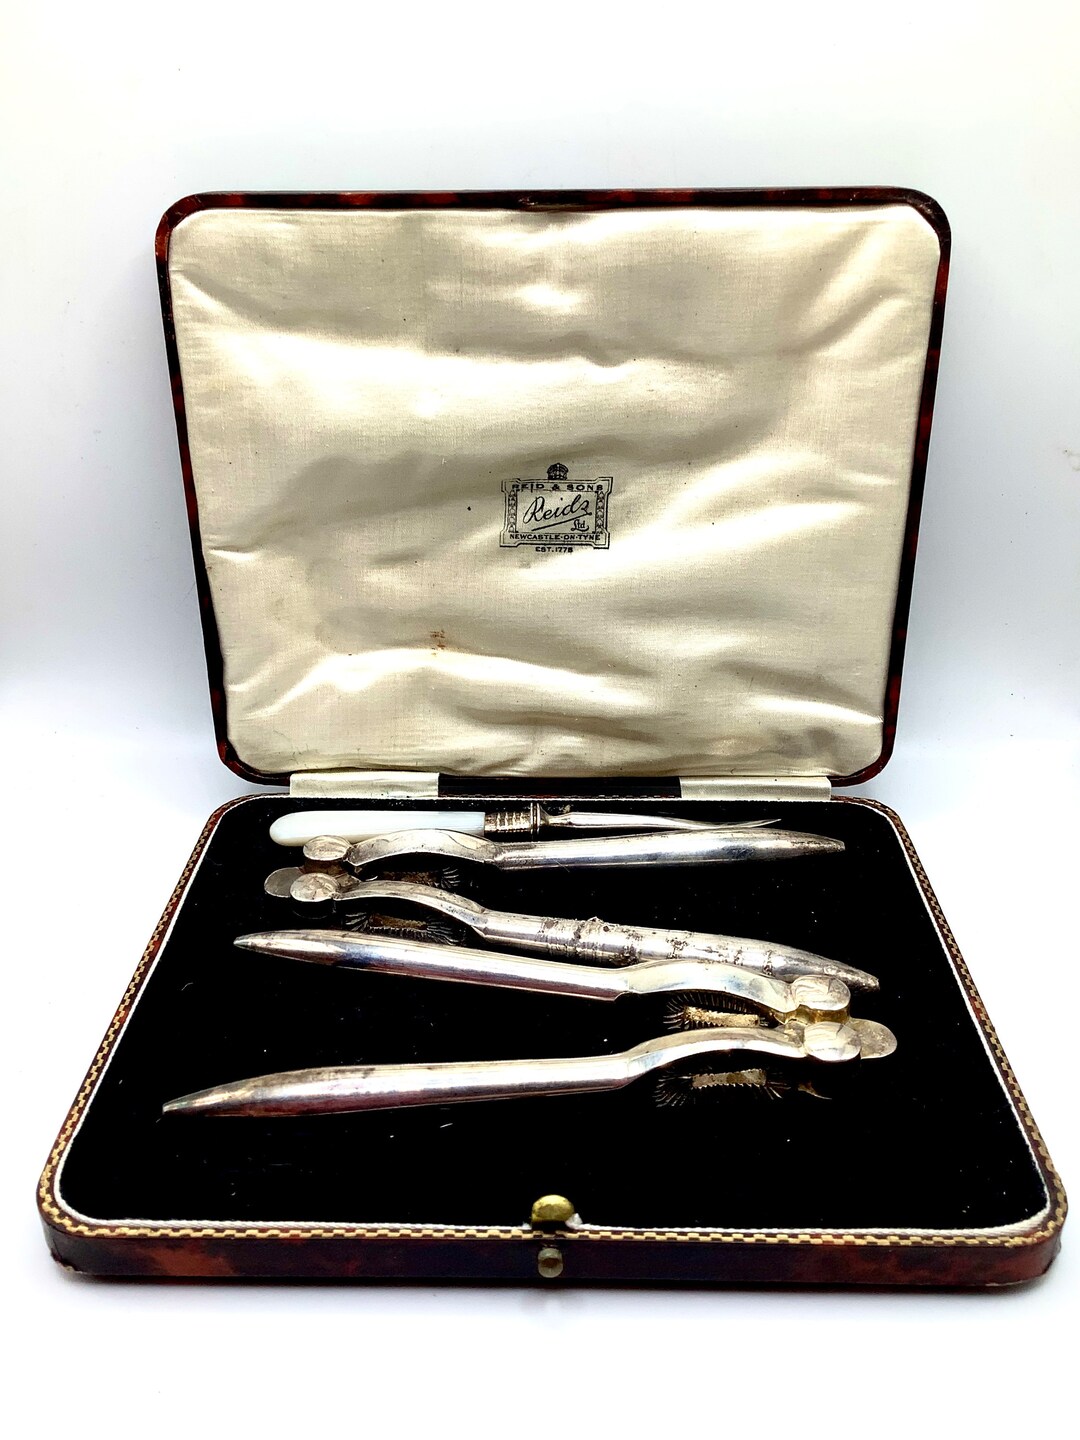 Antique Lobster Cracker Set With Sterling Silver & Mother of Pearl Handle  Picker by Harrison Brothers sheffield in Reids Goldsmith Case -  Norway